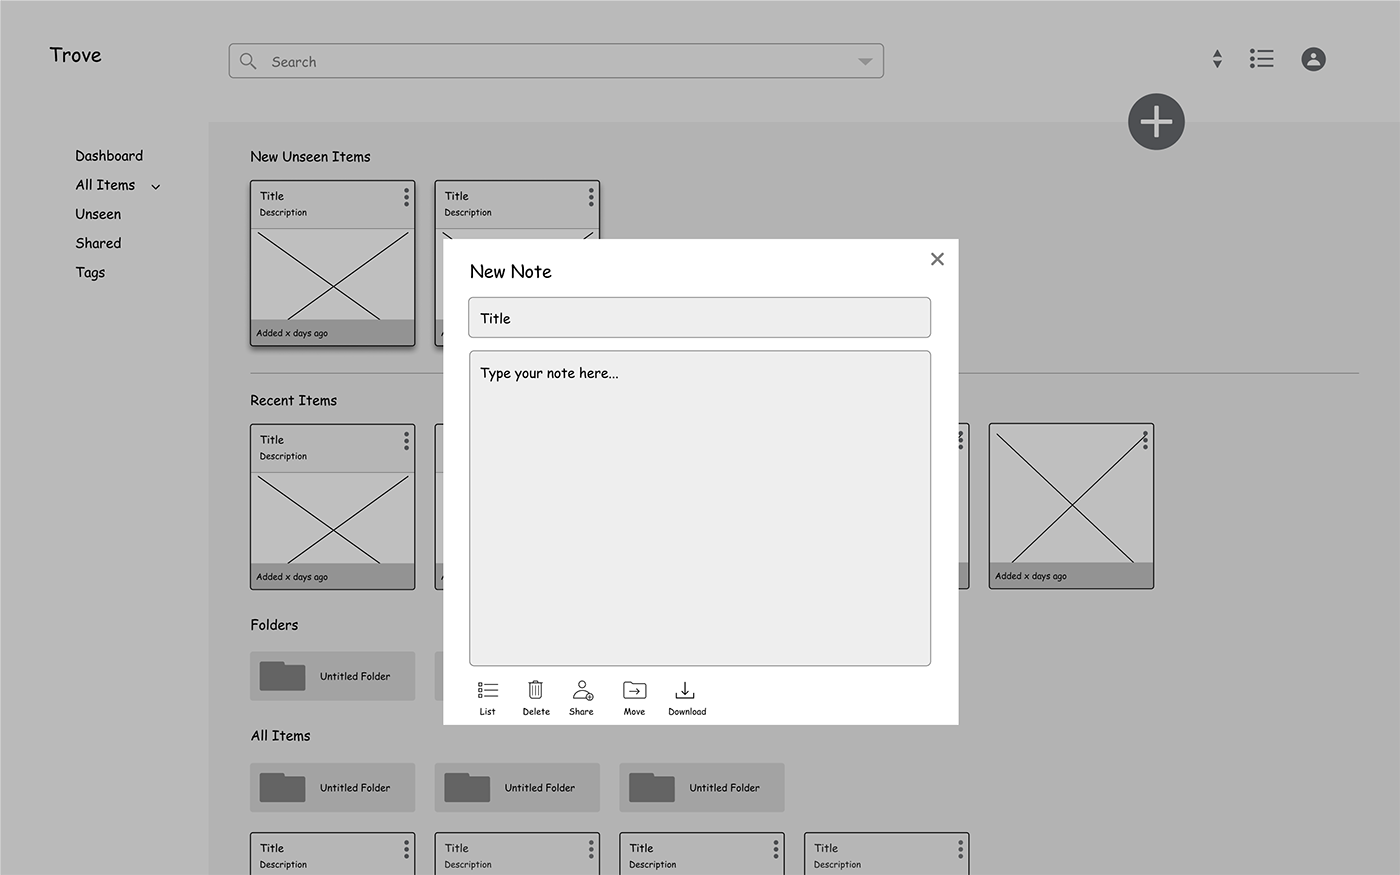 Low-fi Wireframe of how to add a note